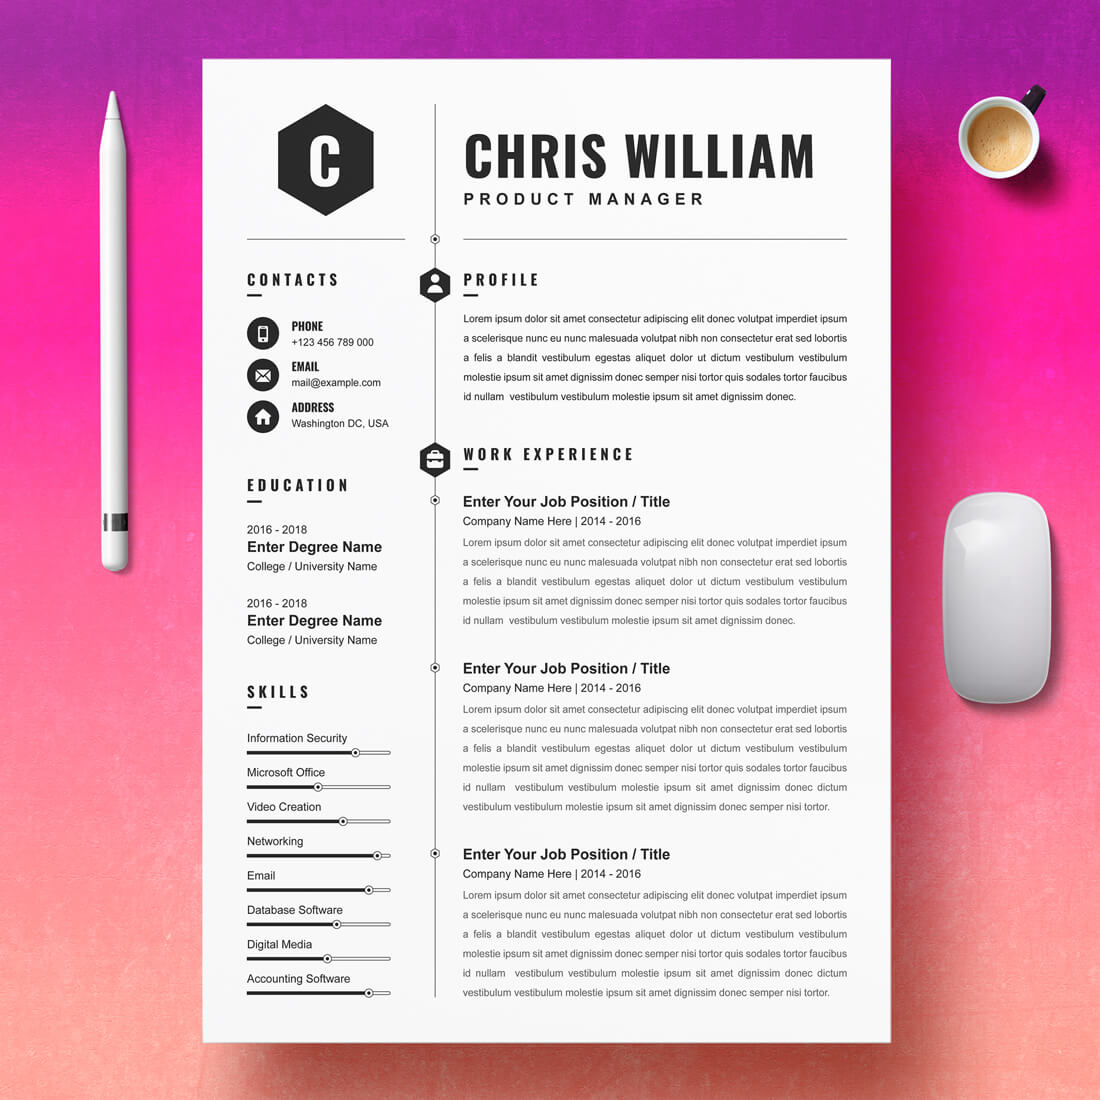 Product Manager Resume Template main cover.